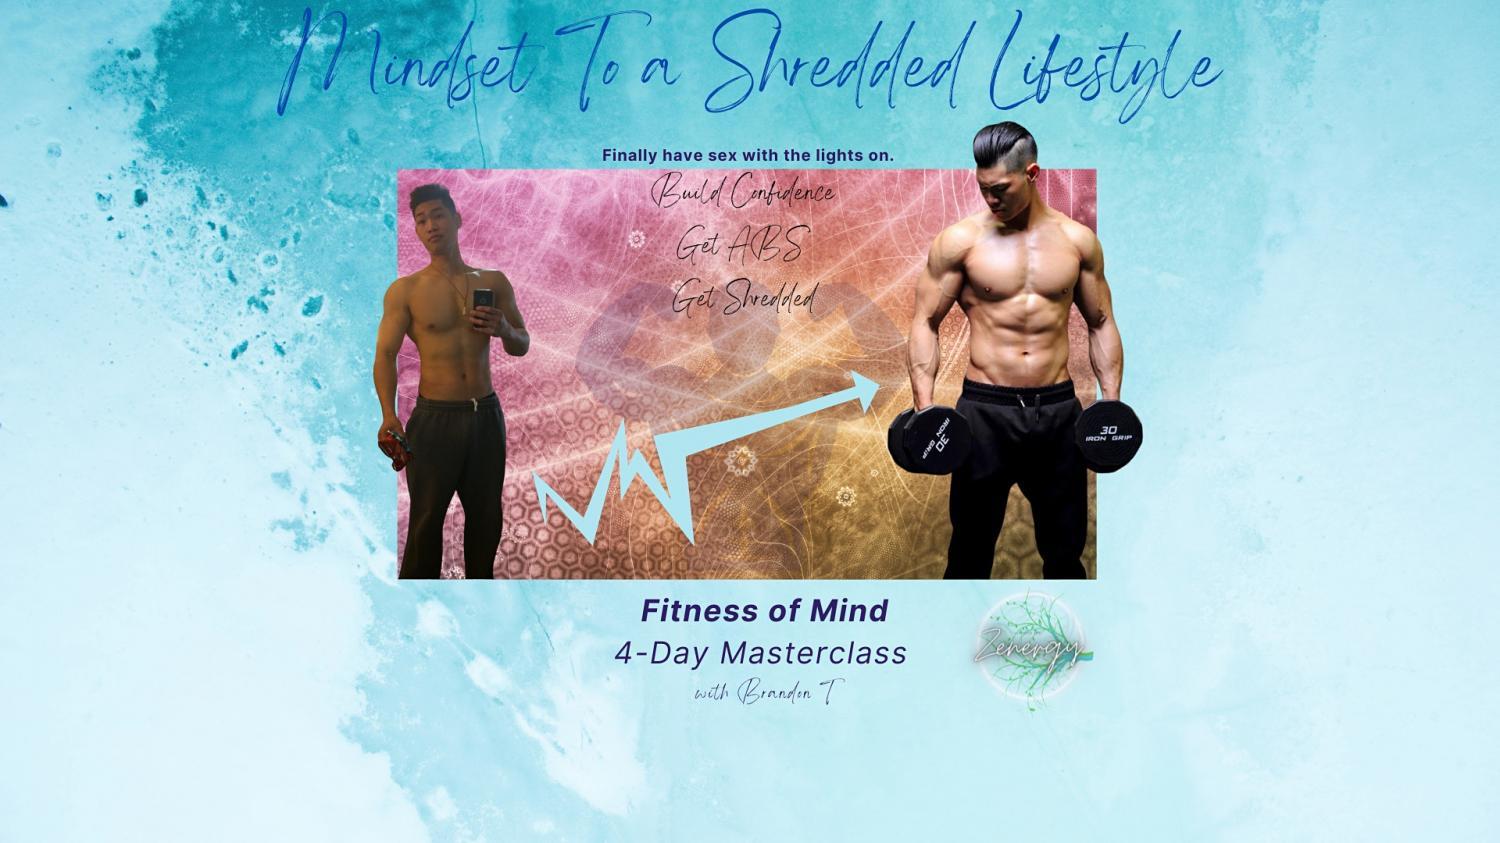 Get Shredded by Transforming Your Lifestyle - Cape Coral
Tue Nov 1, 2:00 PM - Tue Nov 1, 3:00 PM
in 10 days